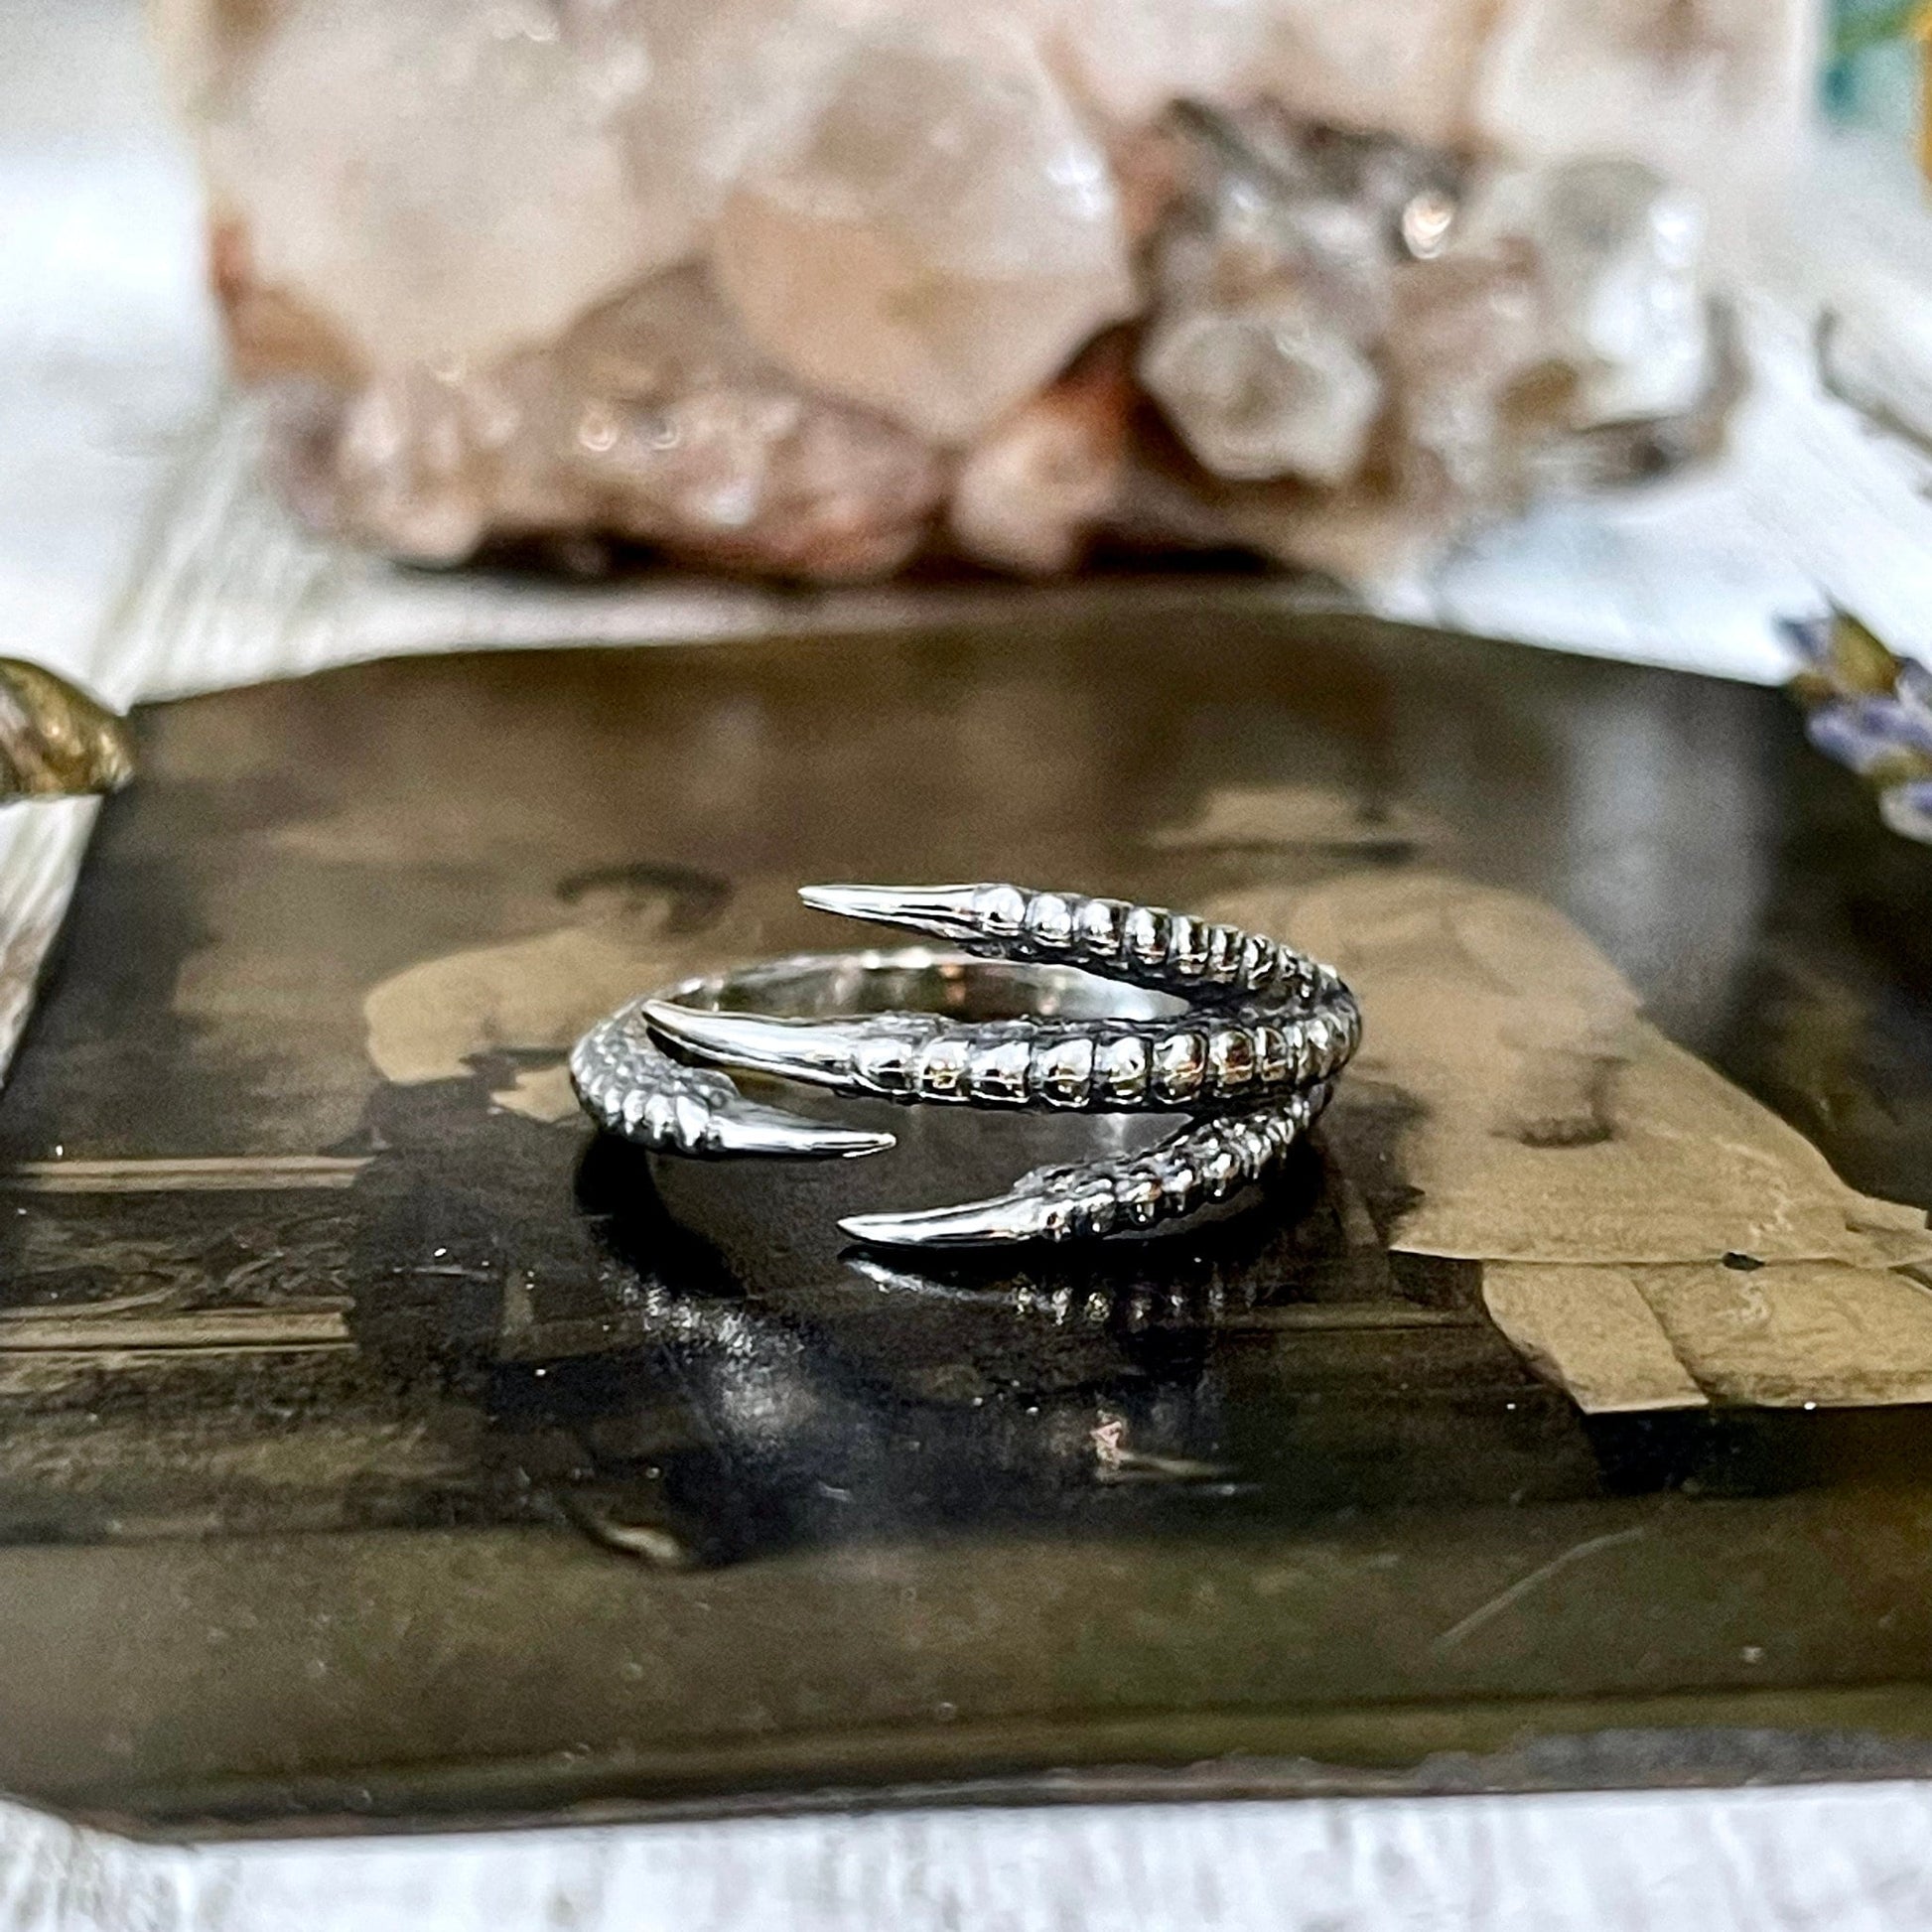 925, Adjustable Ring, Bird Claw Ring, Bohemian Ring, boho jewelry, boho ring, Etsy ID: 1136998367, Festival Jewelry, Goth Ring, Gothic Jewelry, gypsy ring, Jewelry, Raven Claw Ring, Rings, Statement Rings, Sterling Silver, TINY TALISMANS, Witch Jewelry